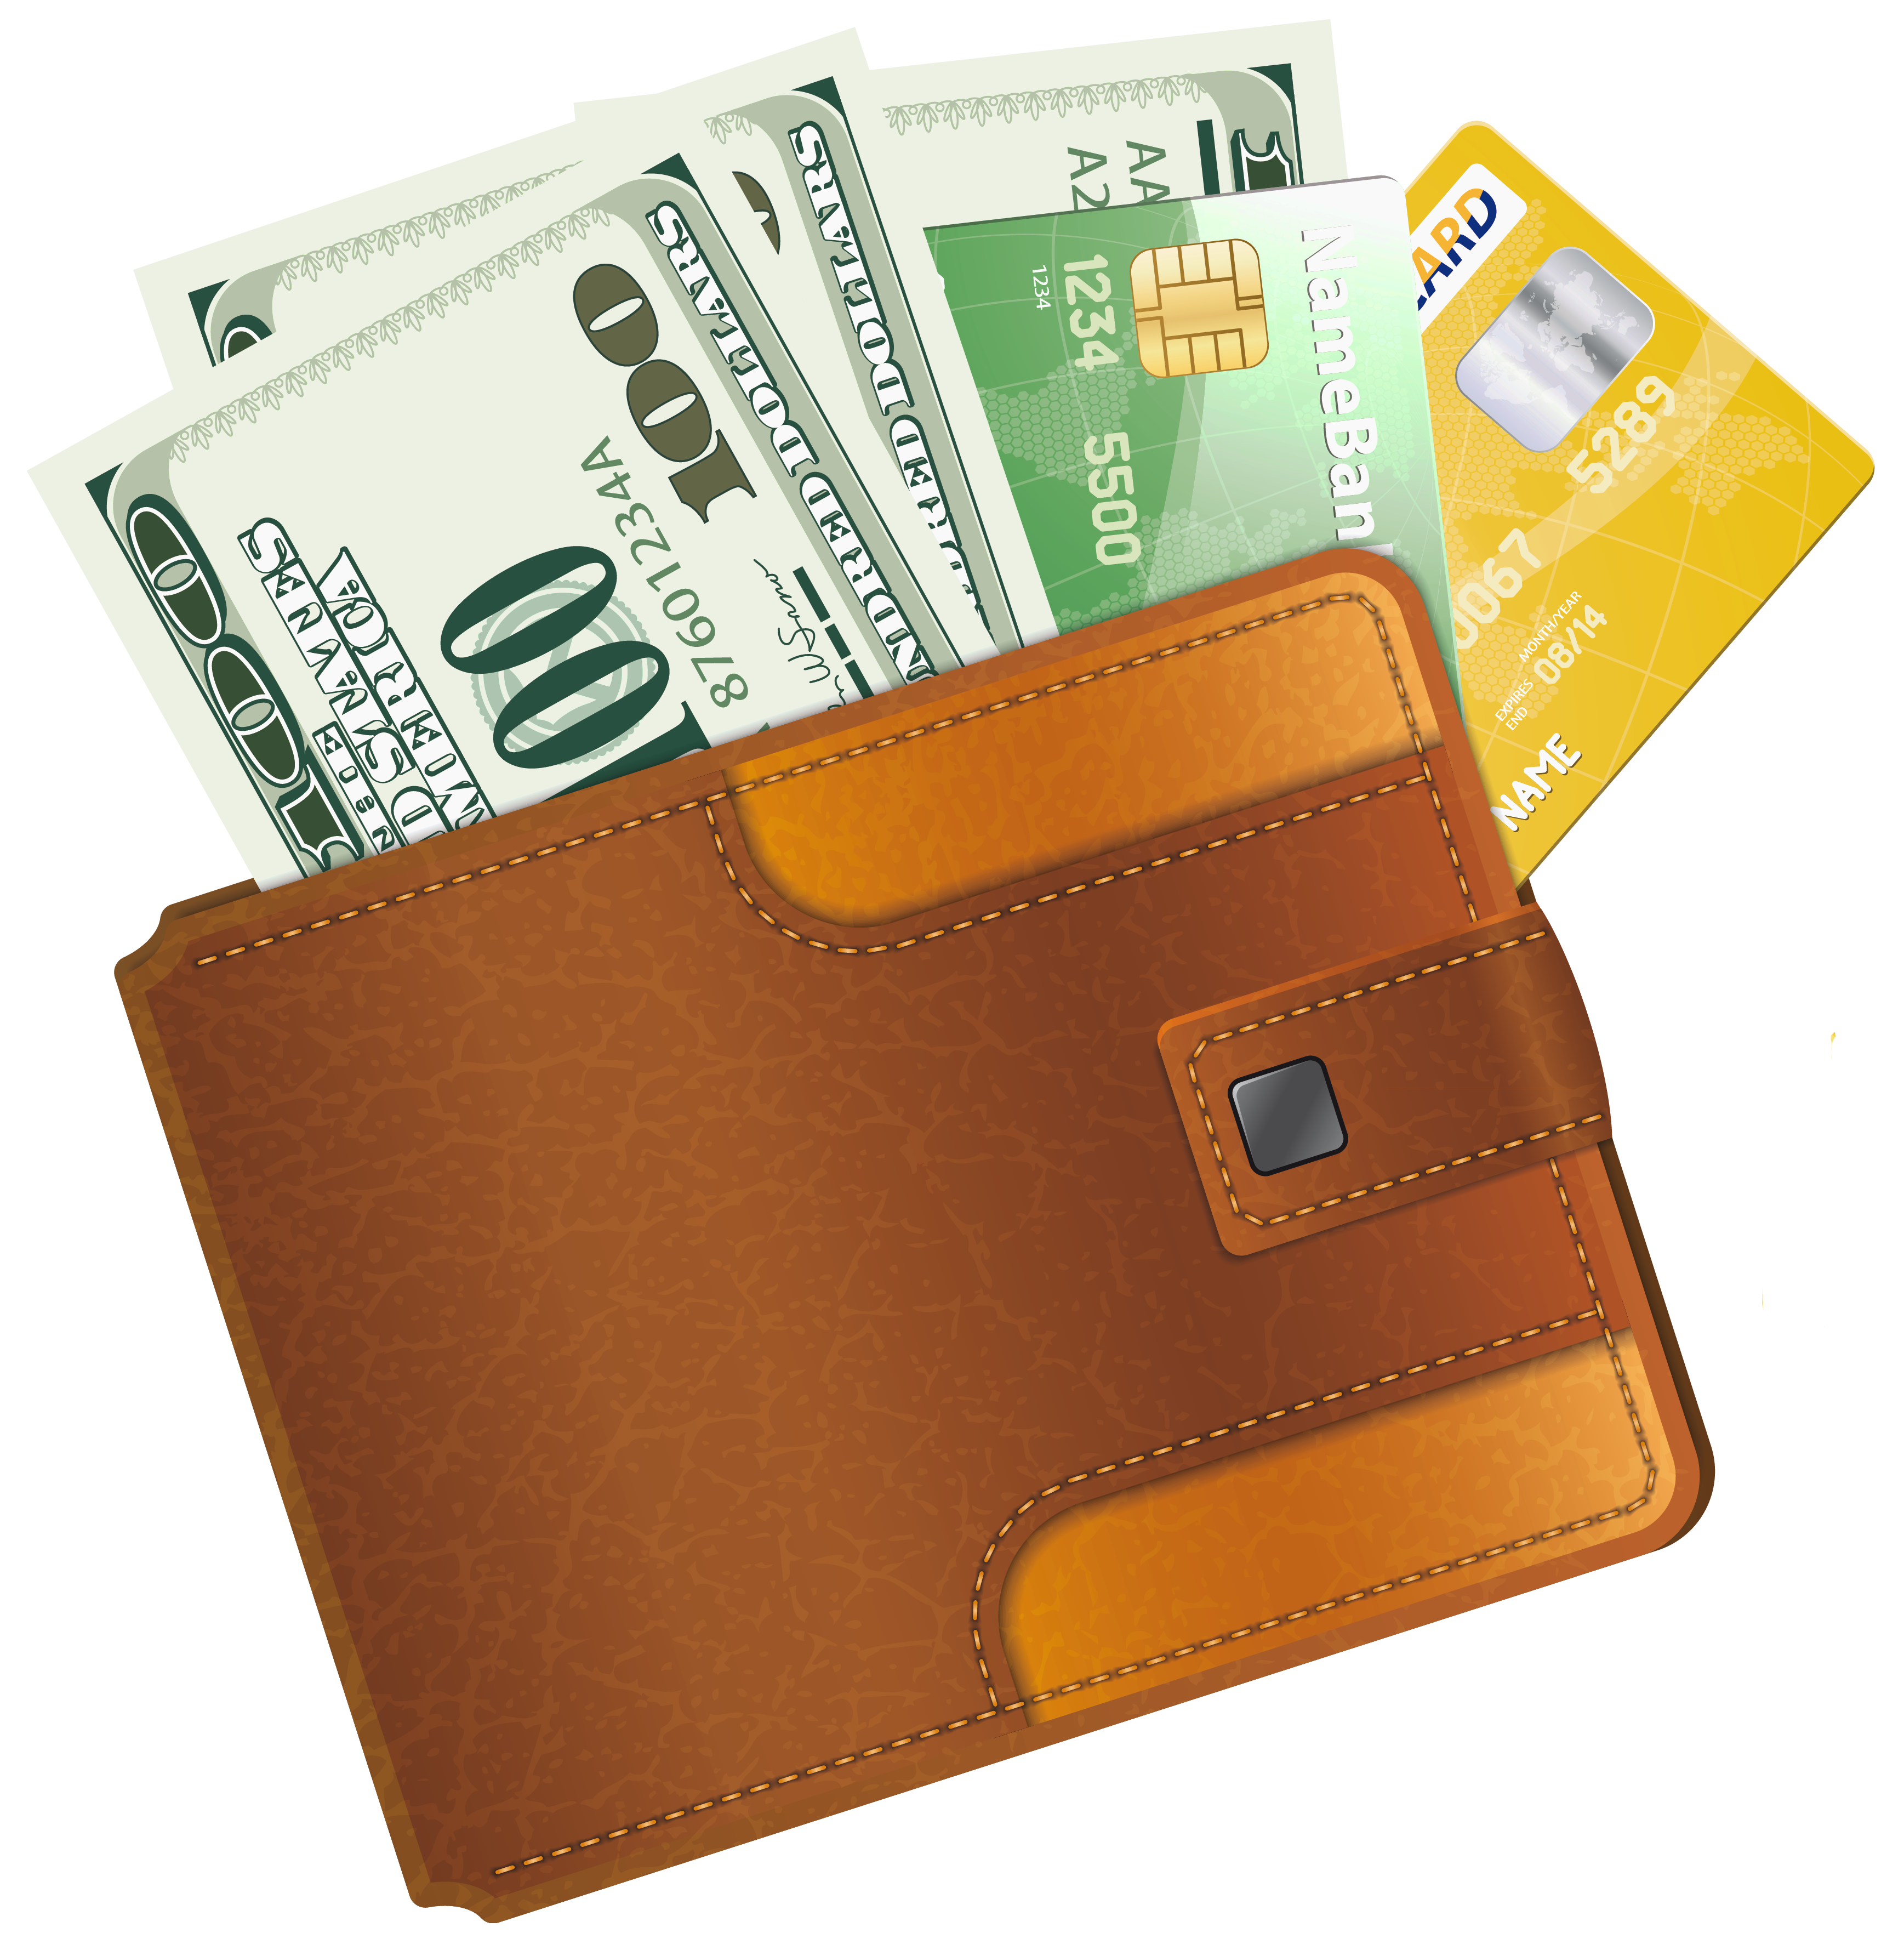 Mystery clipart icon. Wallet with credit cards